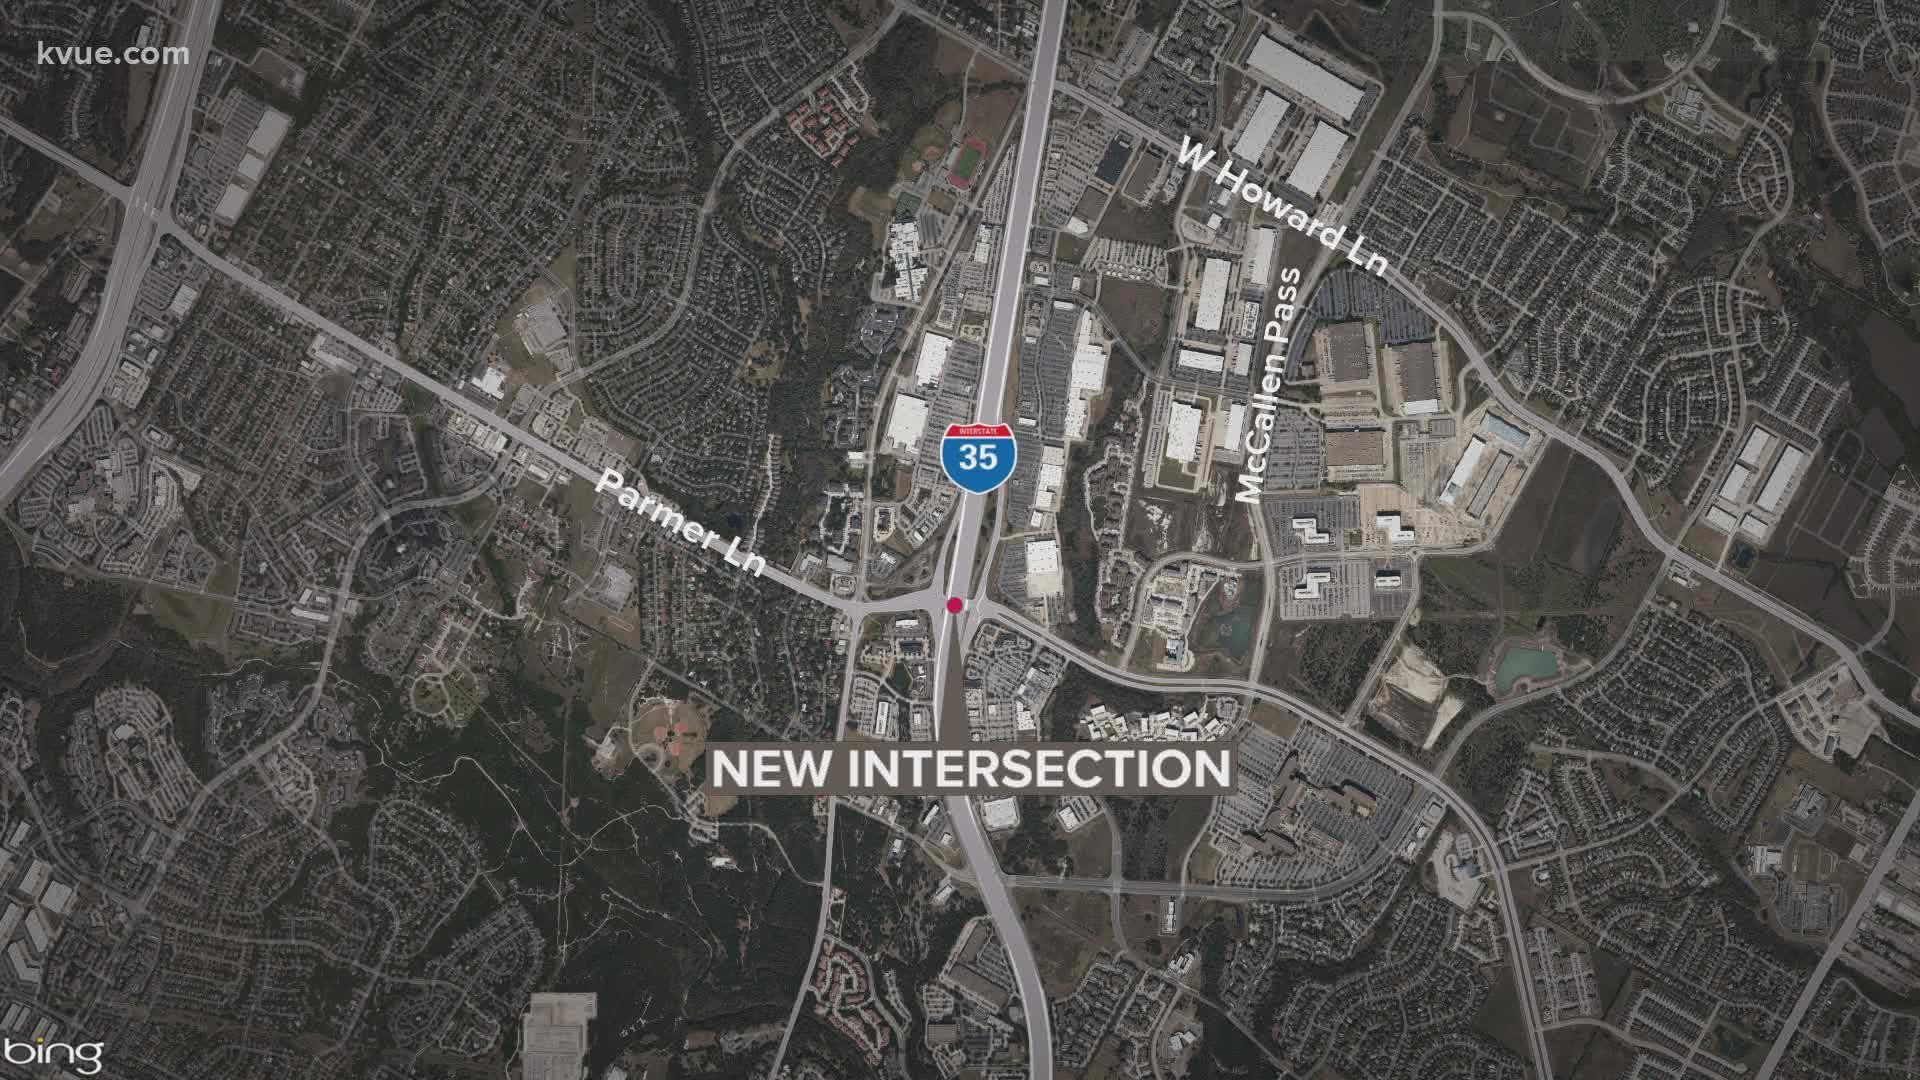 Crews are expected to complete construction on the intersection at Interstate 35 and Parmer Lane by next month.